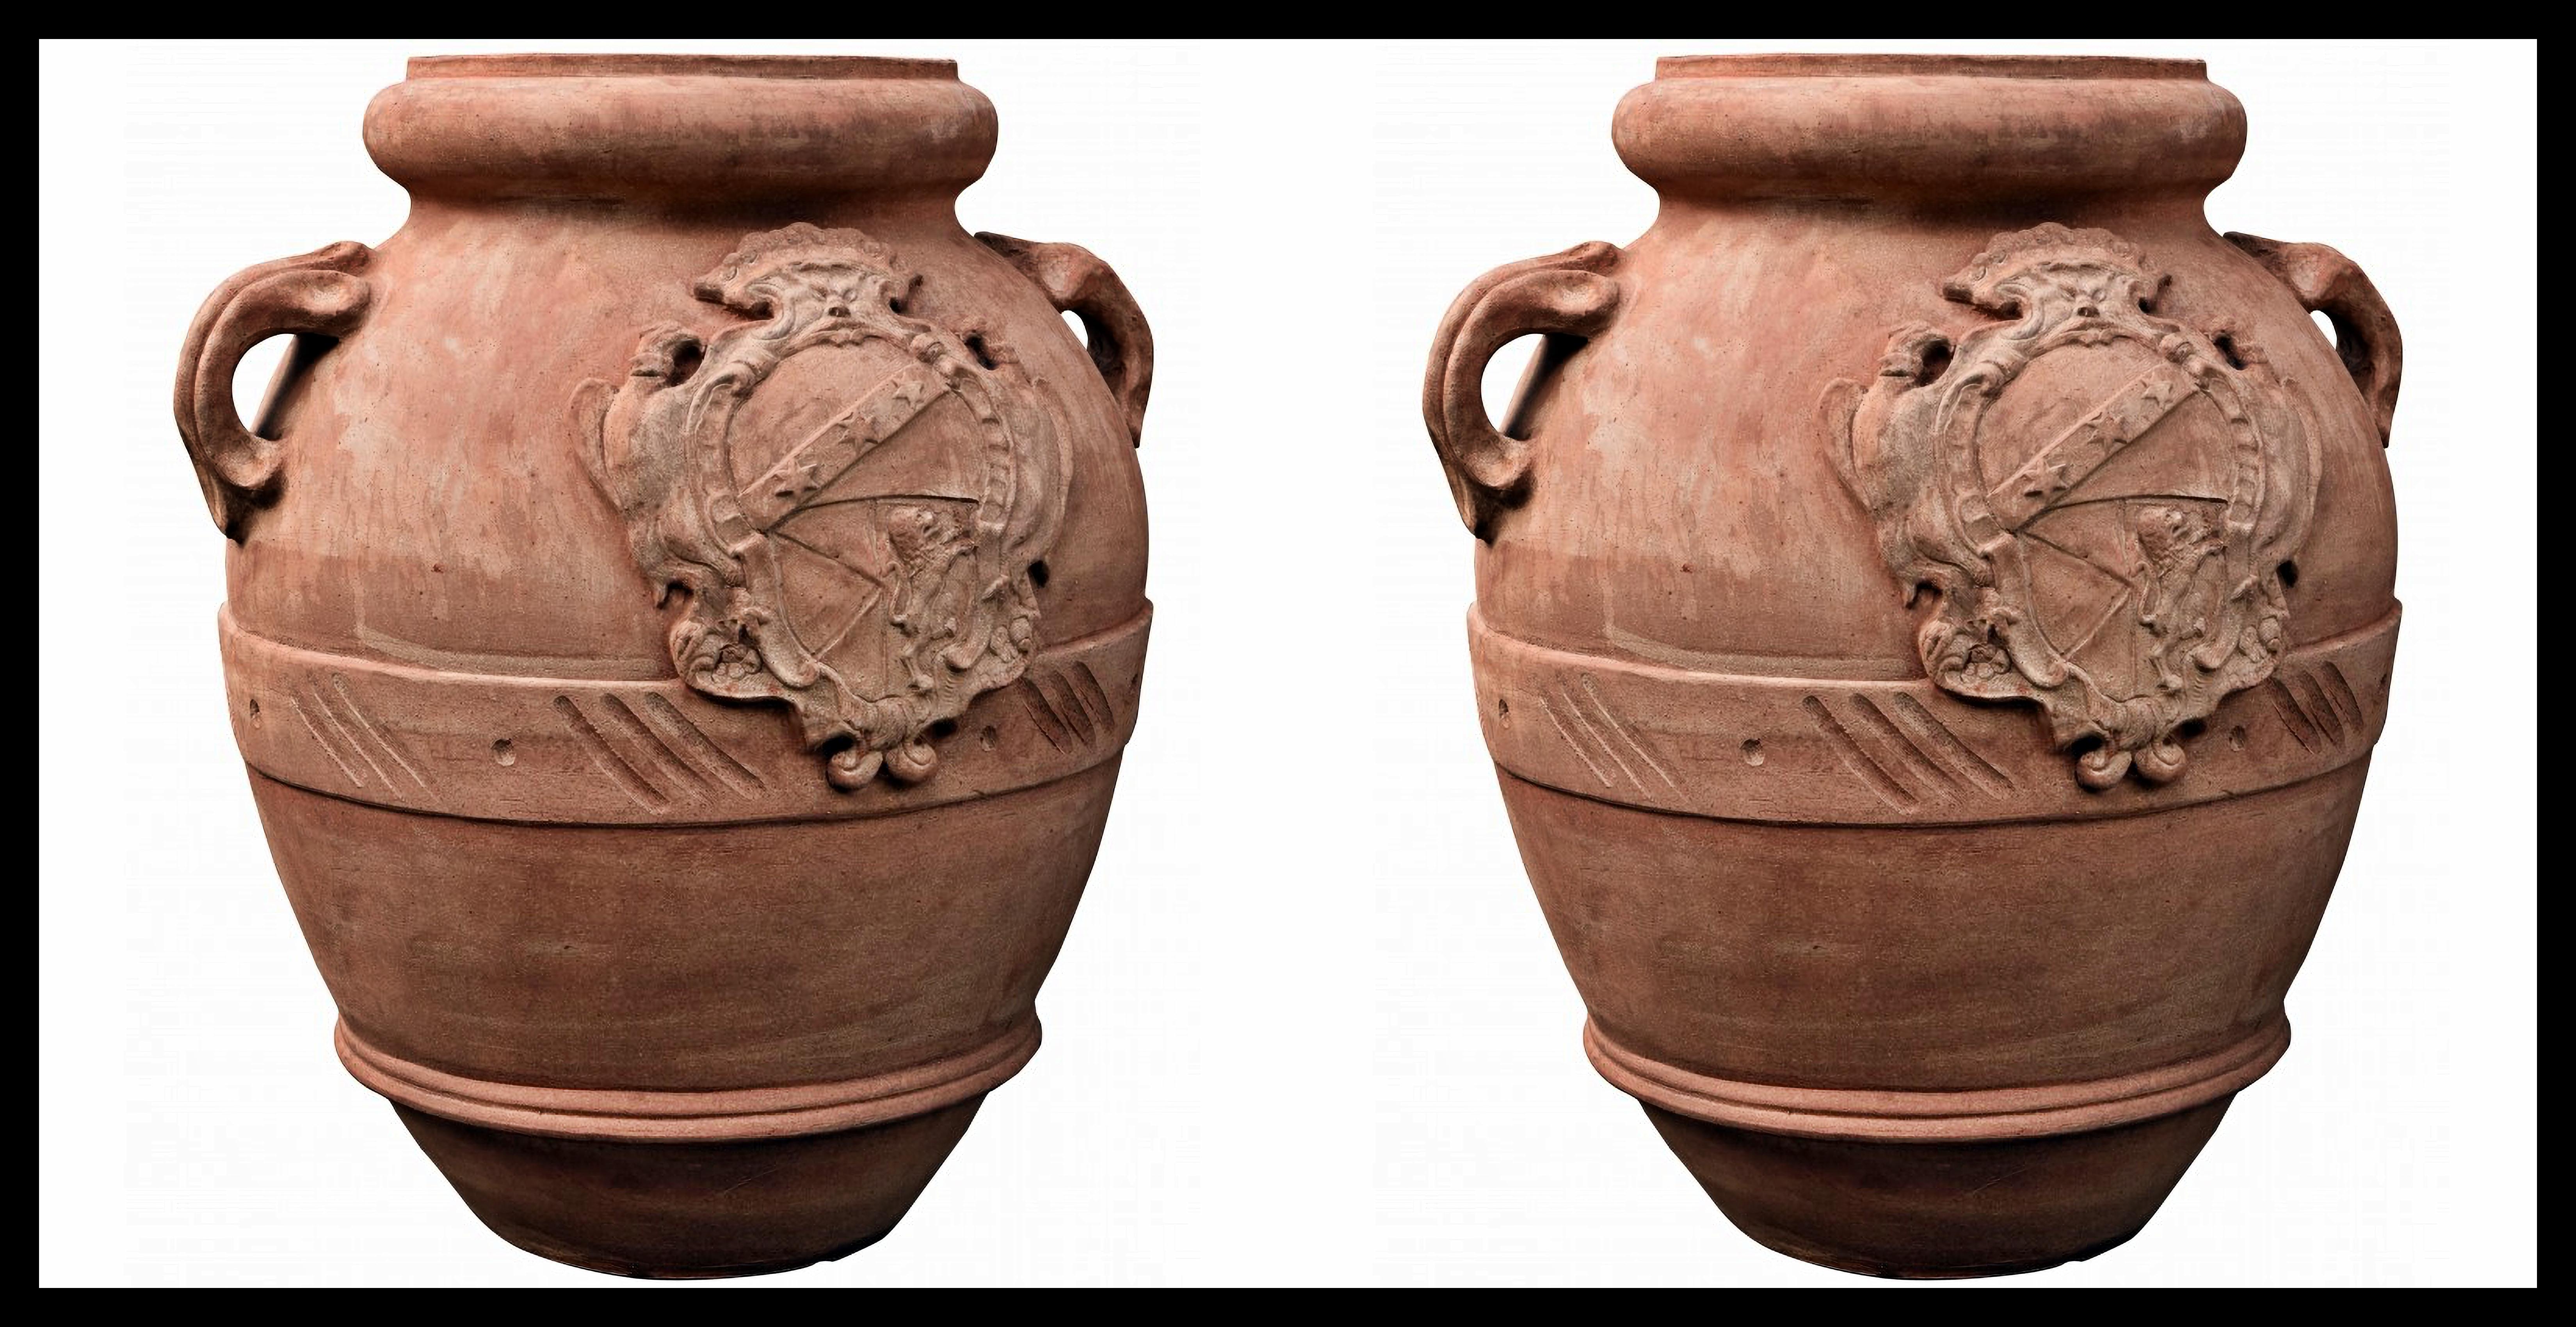 PAIR OF TUSCAN OIL JARS H.70CM WITH GINORI COAT OF ARMS TERRACOTTA 20th Century

Typical Tuscan vase, small and high quality oil container.
Faithful copy of a vase from the 